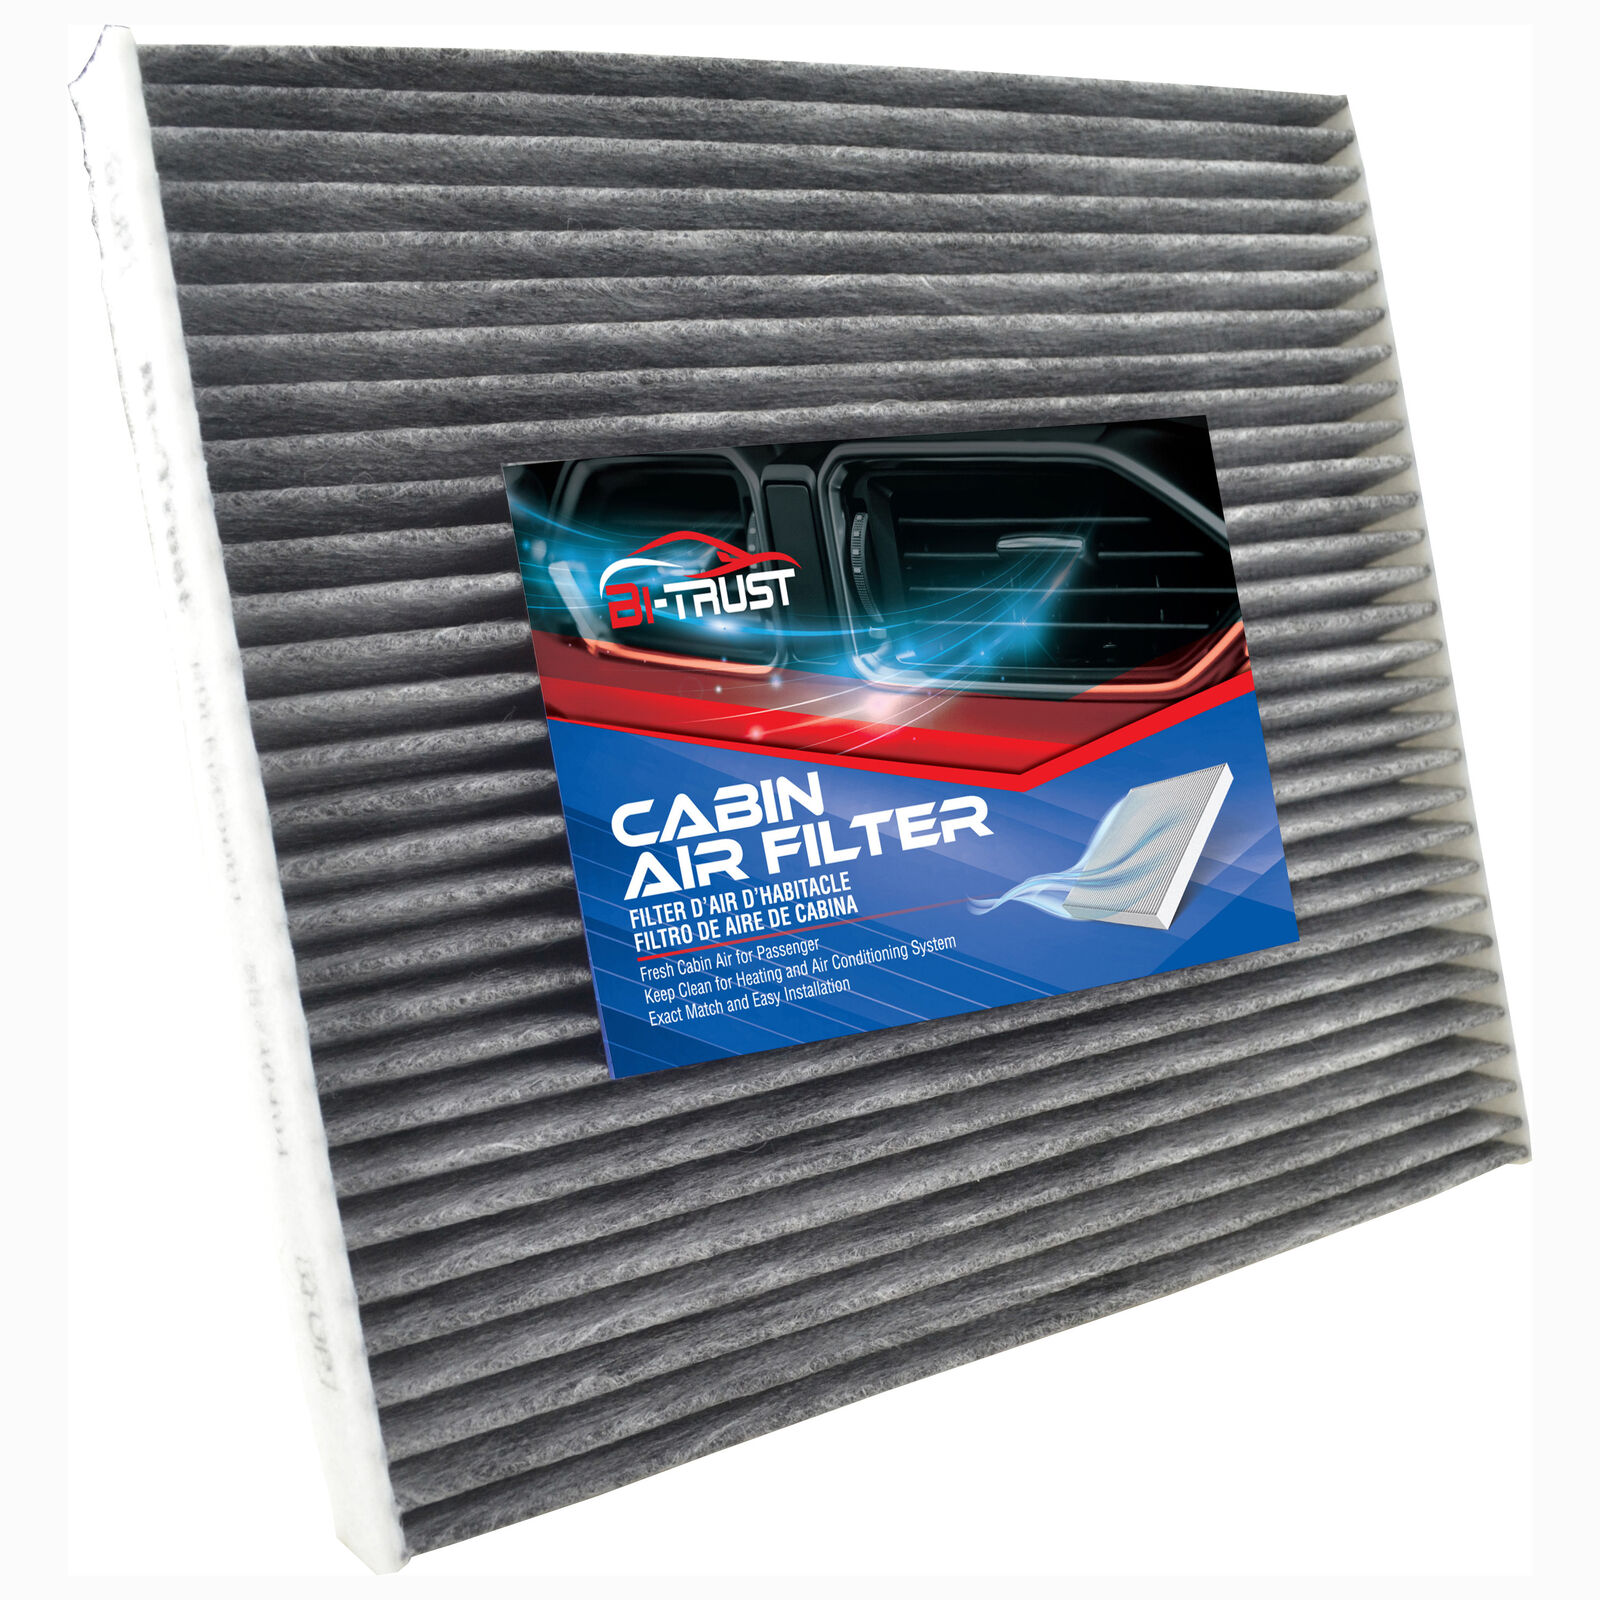 A/C Cabin Air Filter for Cadillac CTS 2004-2013 V6 3.6L STS 2006-2009 V8 4.4L